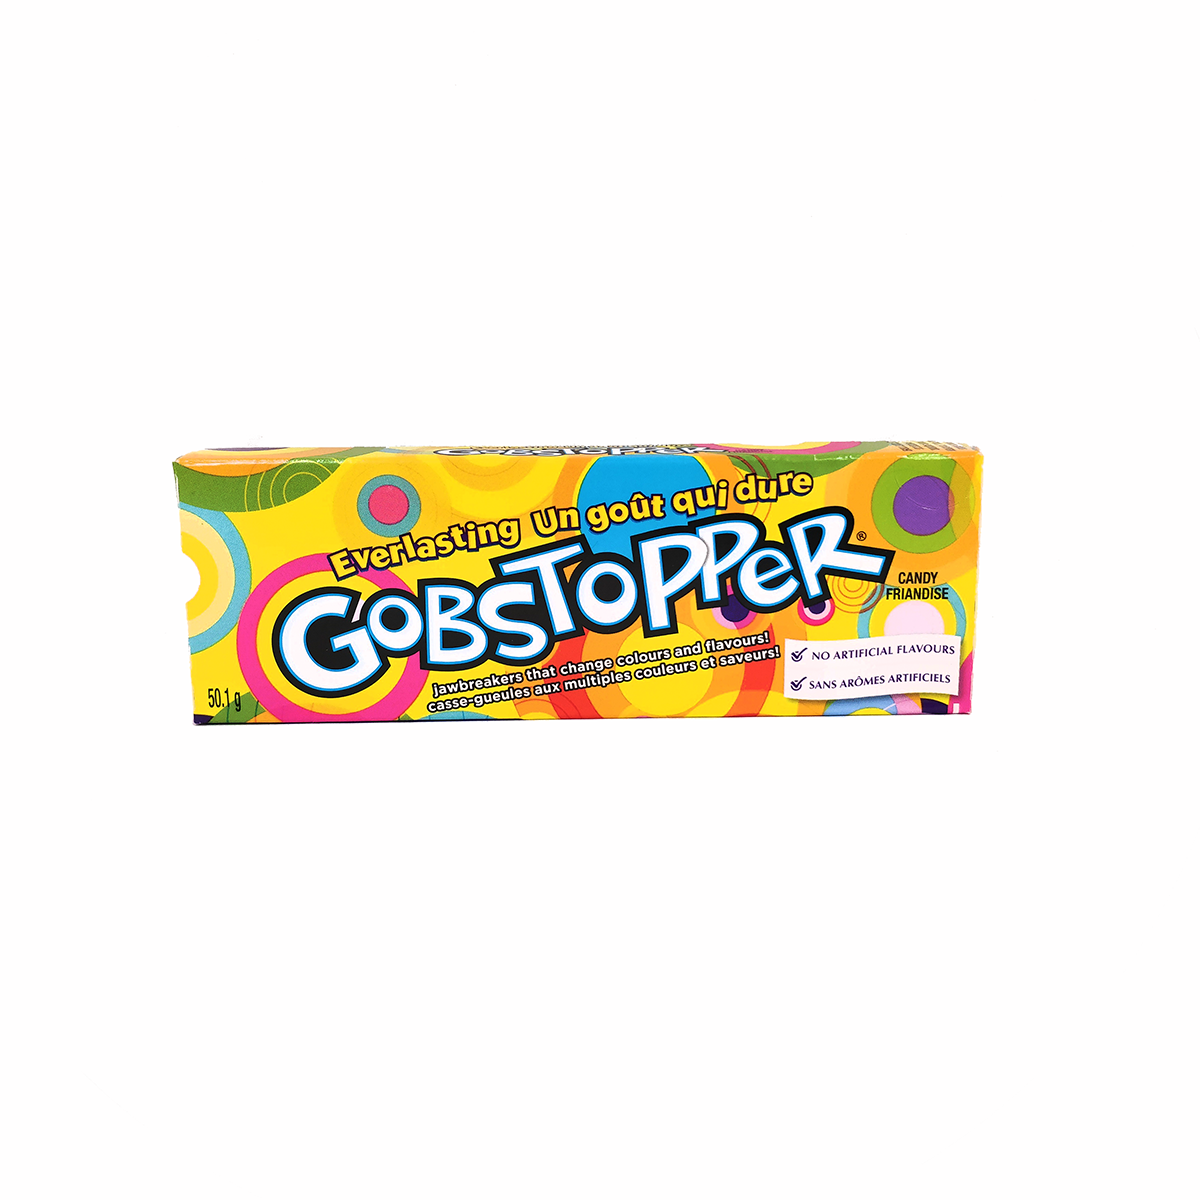 Everlasting Gobstoppers by Wonka 50g Candy